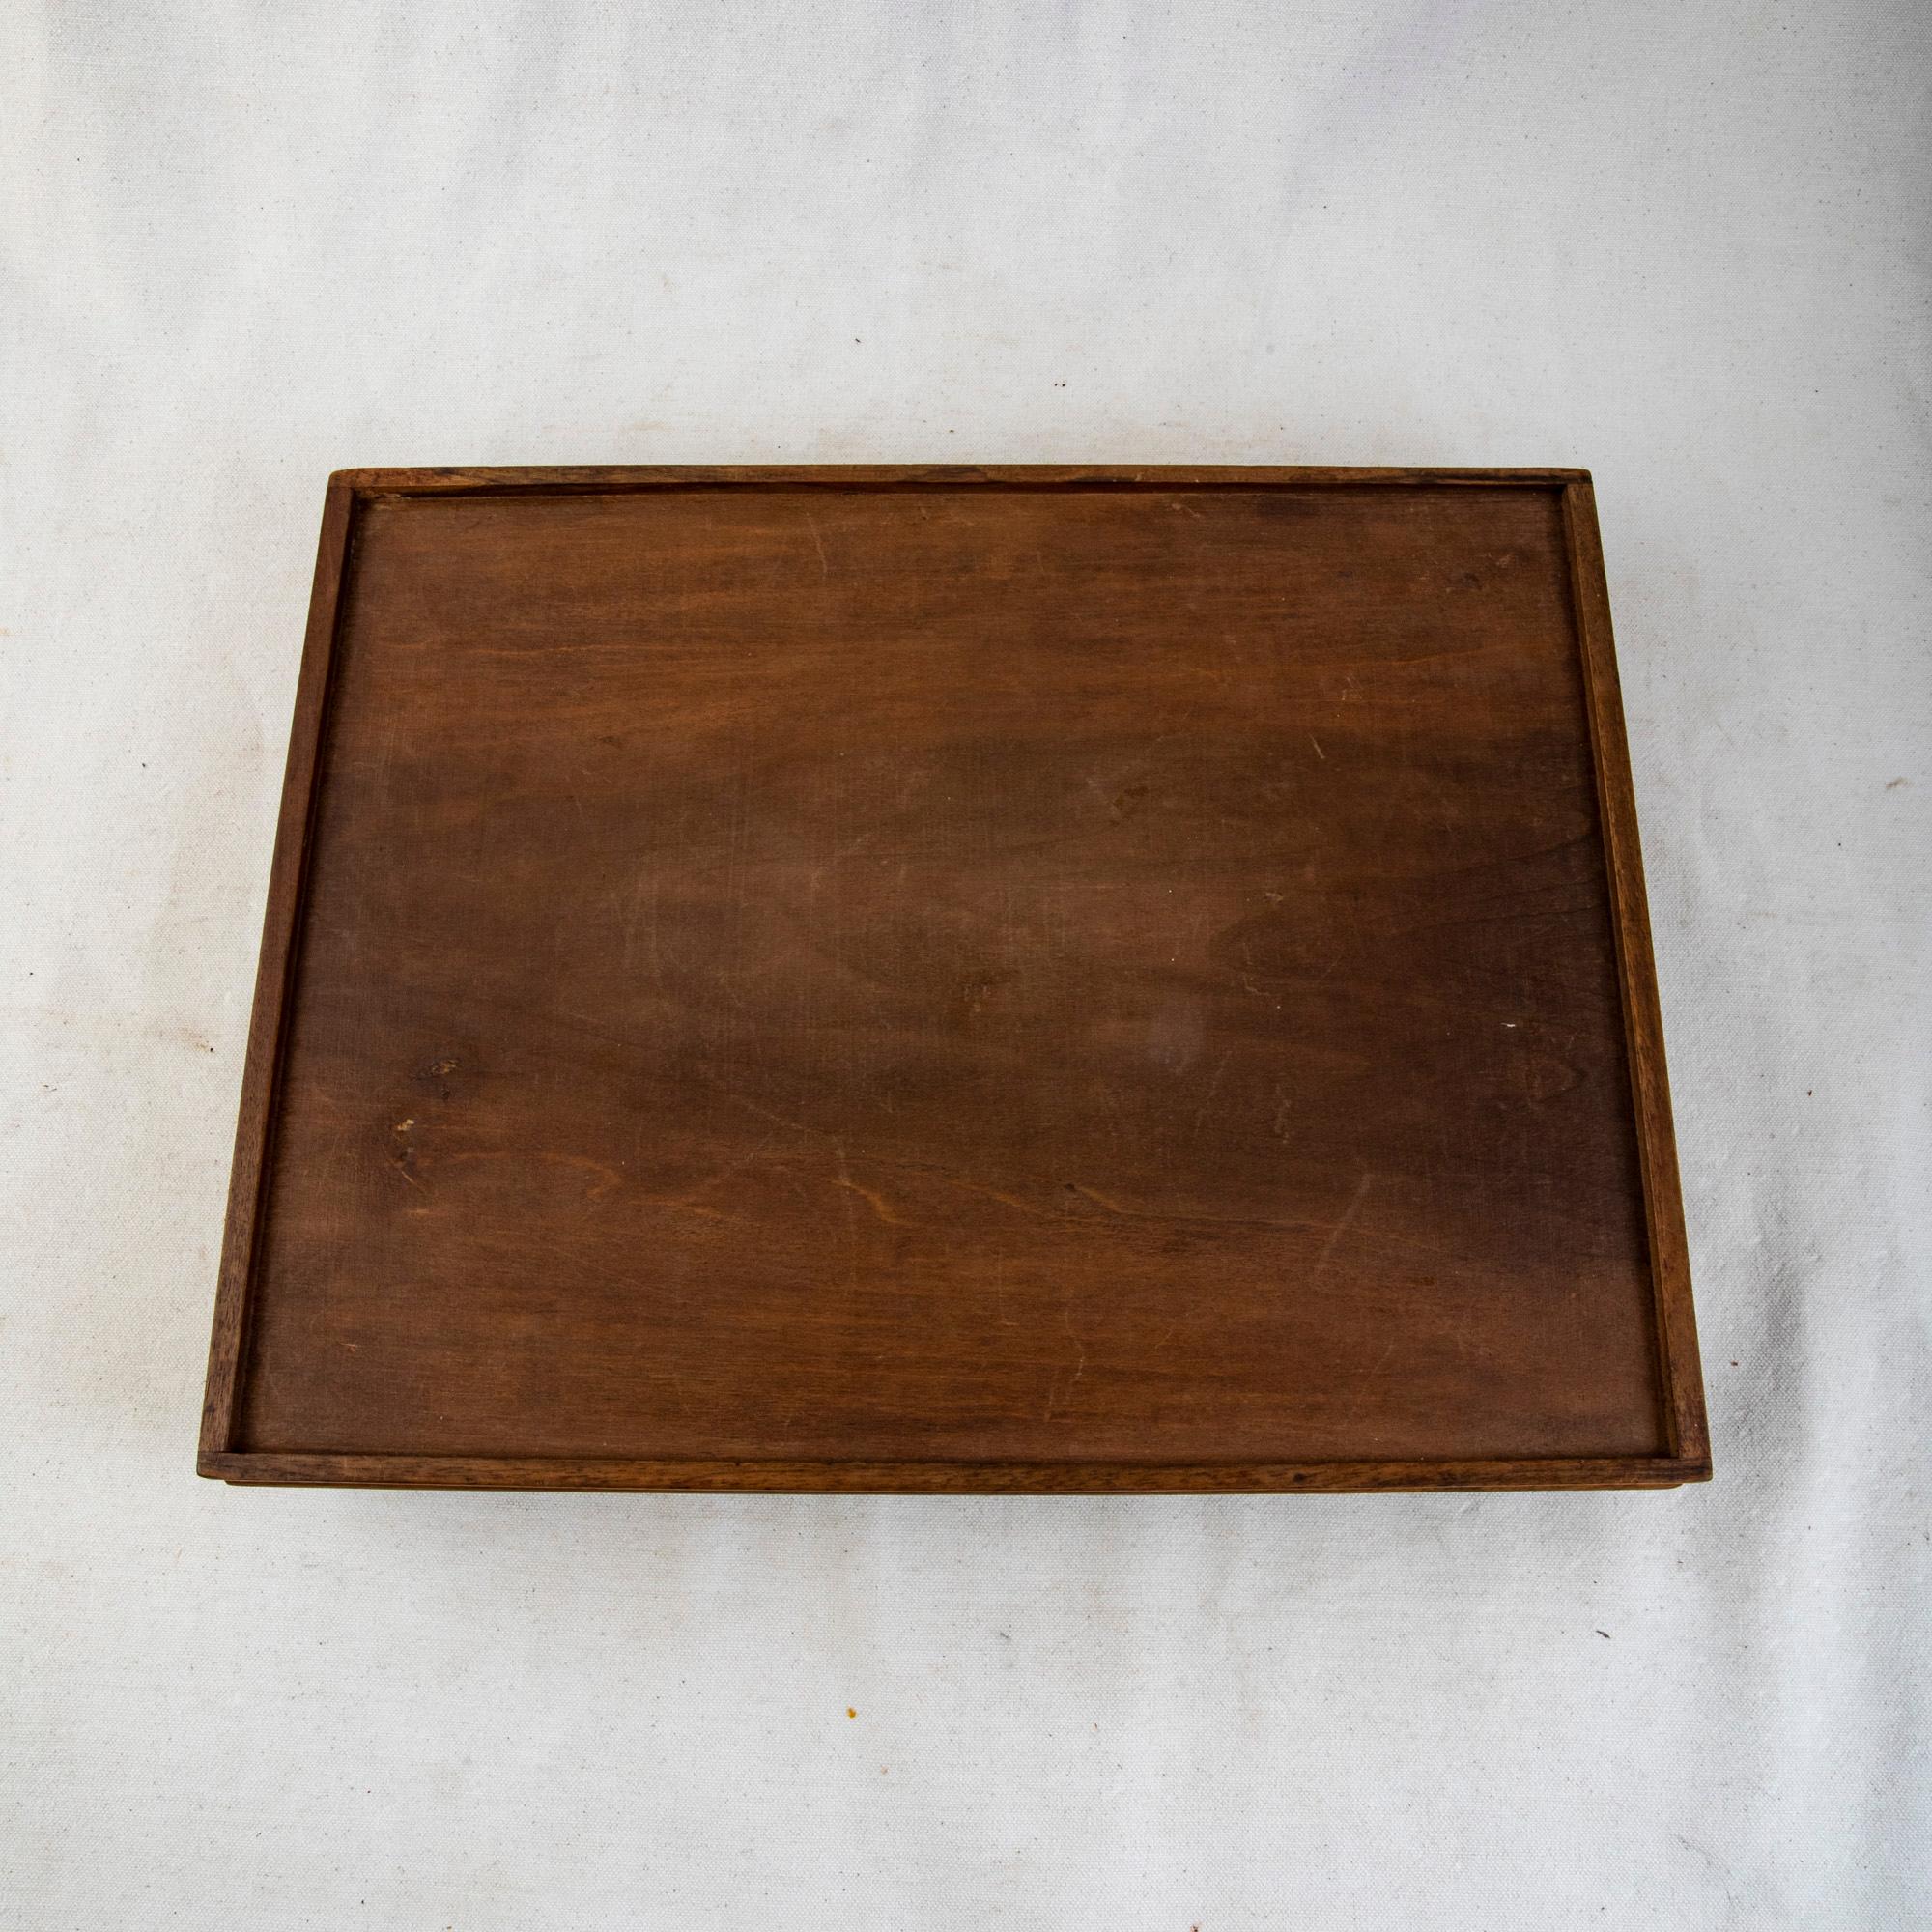 This French Art Nouveau period palisander tray is signed by the renowned artist Galle (Emile Galle 1846-1904). This tray features inlaid lily of the valley in sycamore and lemonwood. Cut out handles on both sides allow for easy carrying. The tray